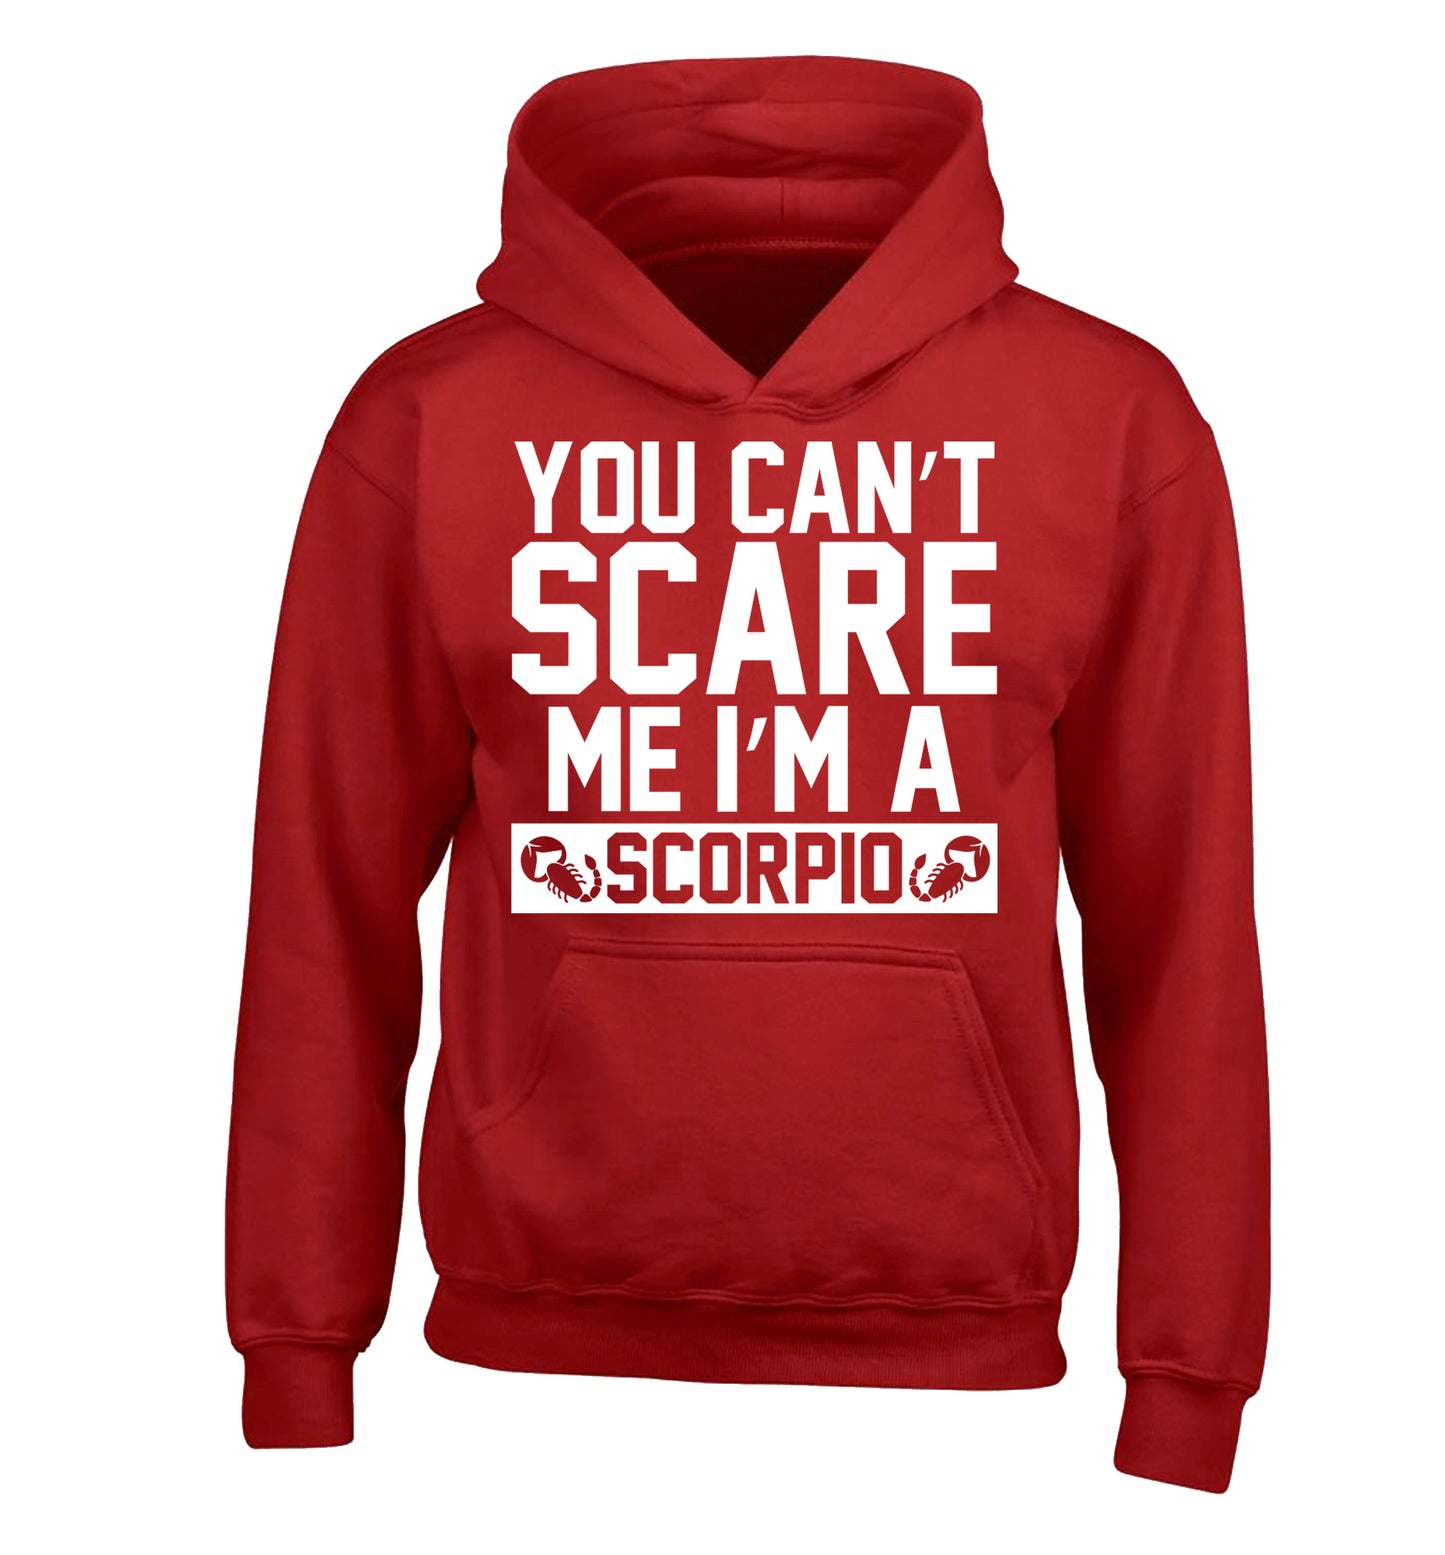 You can't scare me I'm a scorpio children's red hoodie 12-13 Years